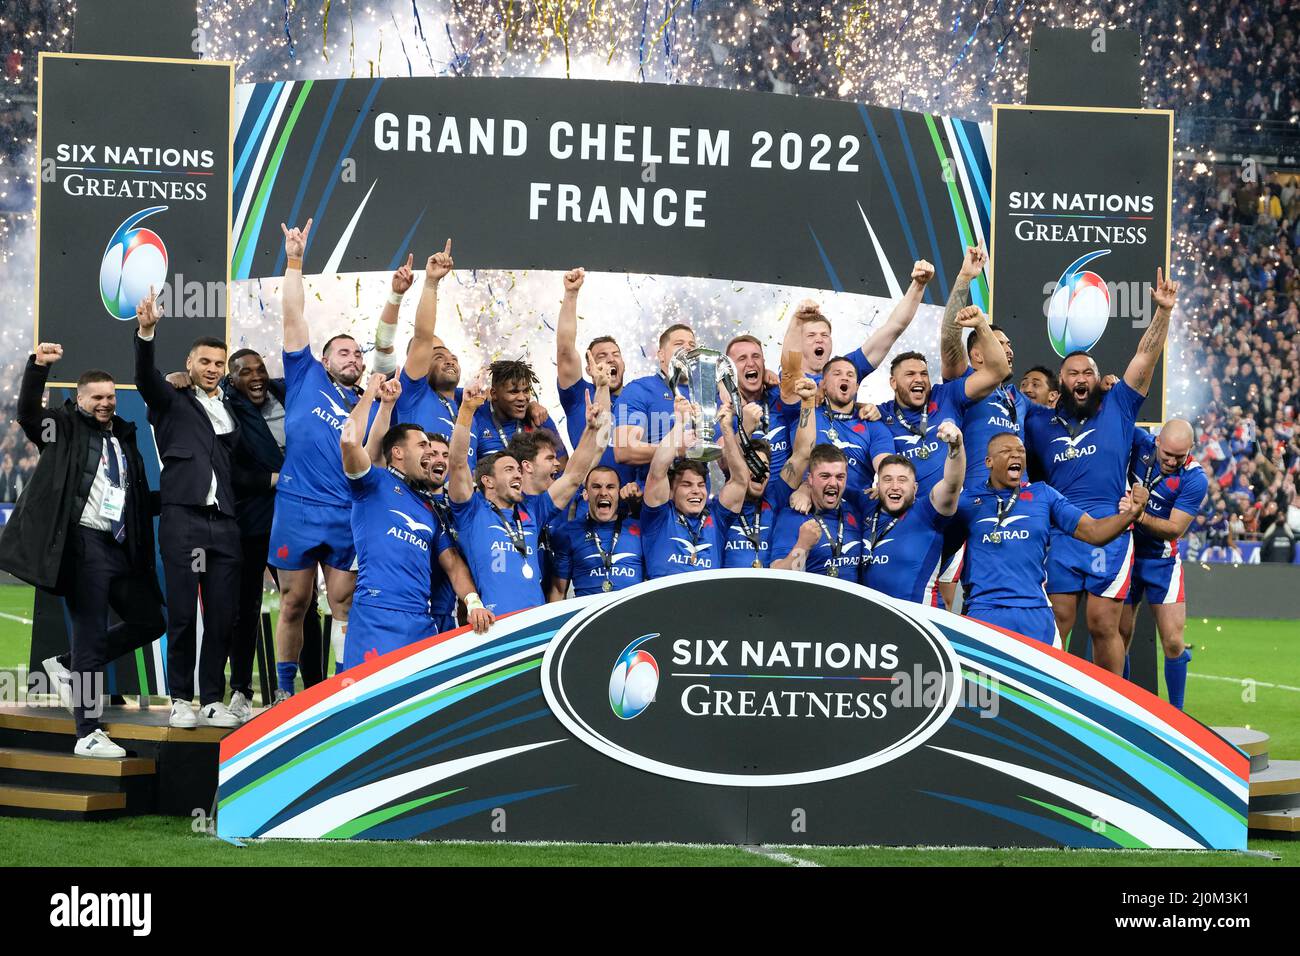 March 20, 2022, Saint Denis, Seine Saint Denis, France: The French team won the Guinness Six Nations Rugby tournament and the grand slam at the Stade de France - St Denis - France.France won 25:13 (Credit Image: © Pierre Stevenin/ZUMA Press Wire) Stock Photo